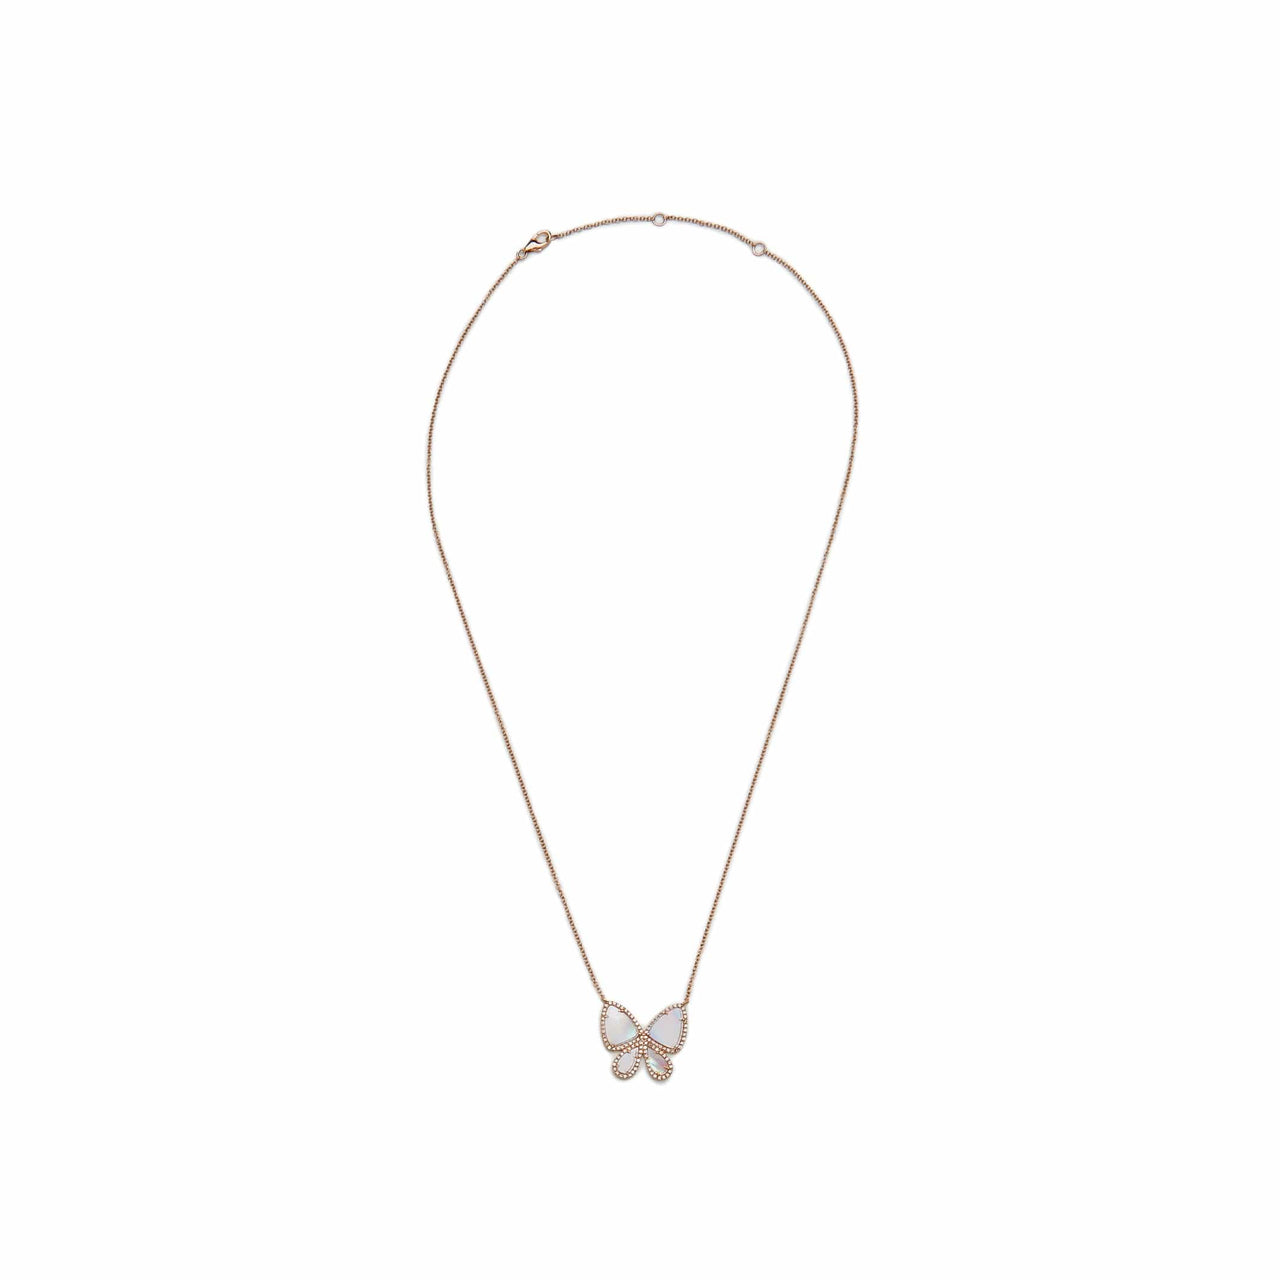 Necklace Mother of Pearl and Diamond Butterfly Rose Gold Chain Pendant Wrist Aficionado